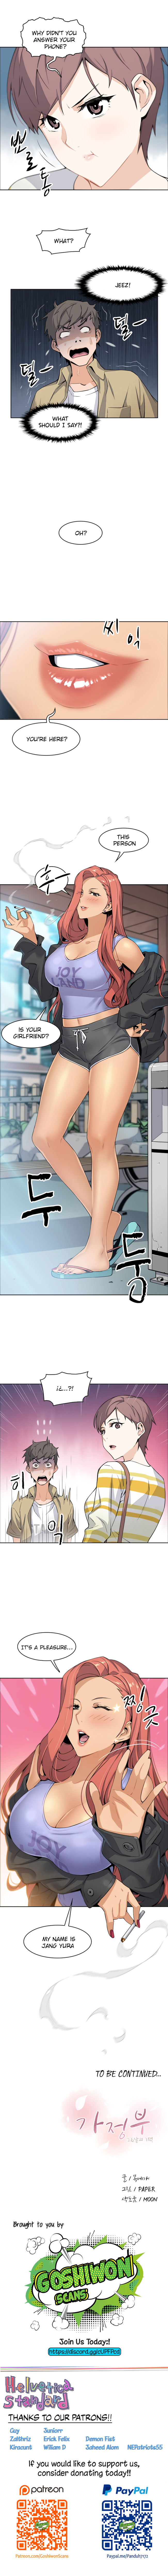 Housekeeper Manhwa - Chapter 2 Page 11